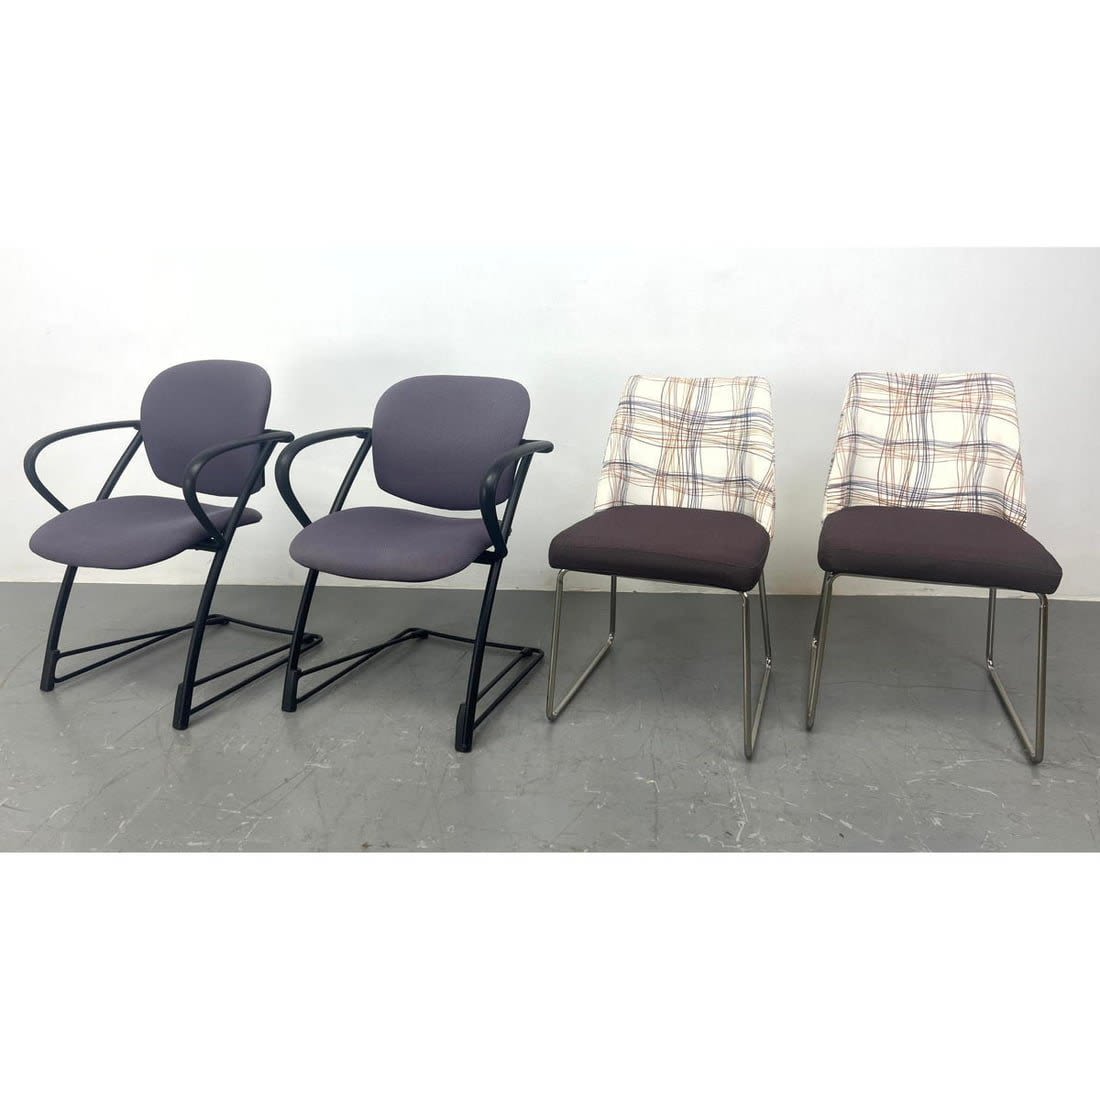 2 pairs of Chairs Steelcase arm 362e5a